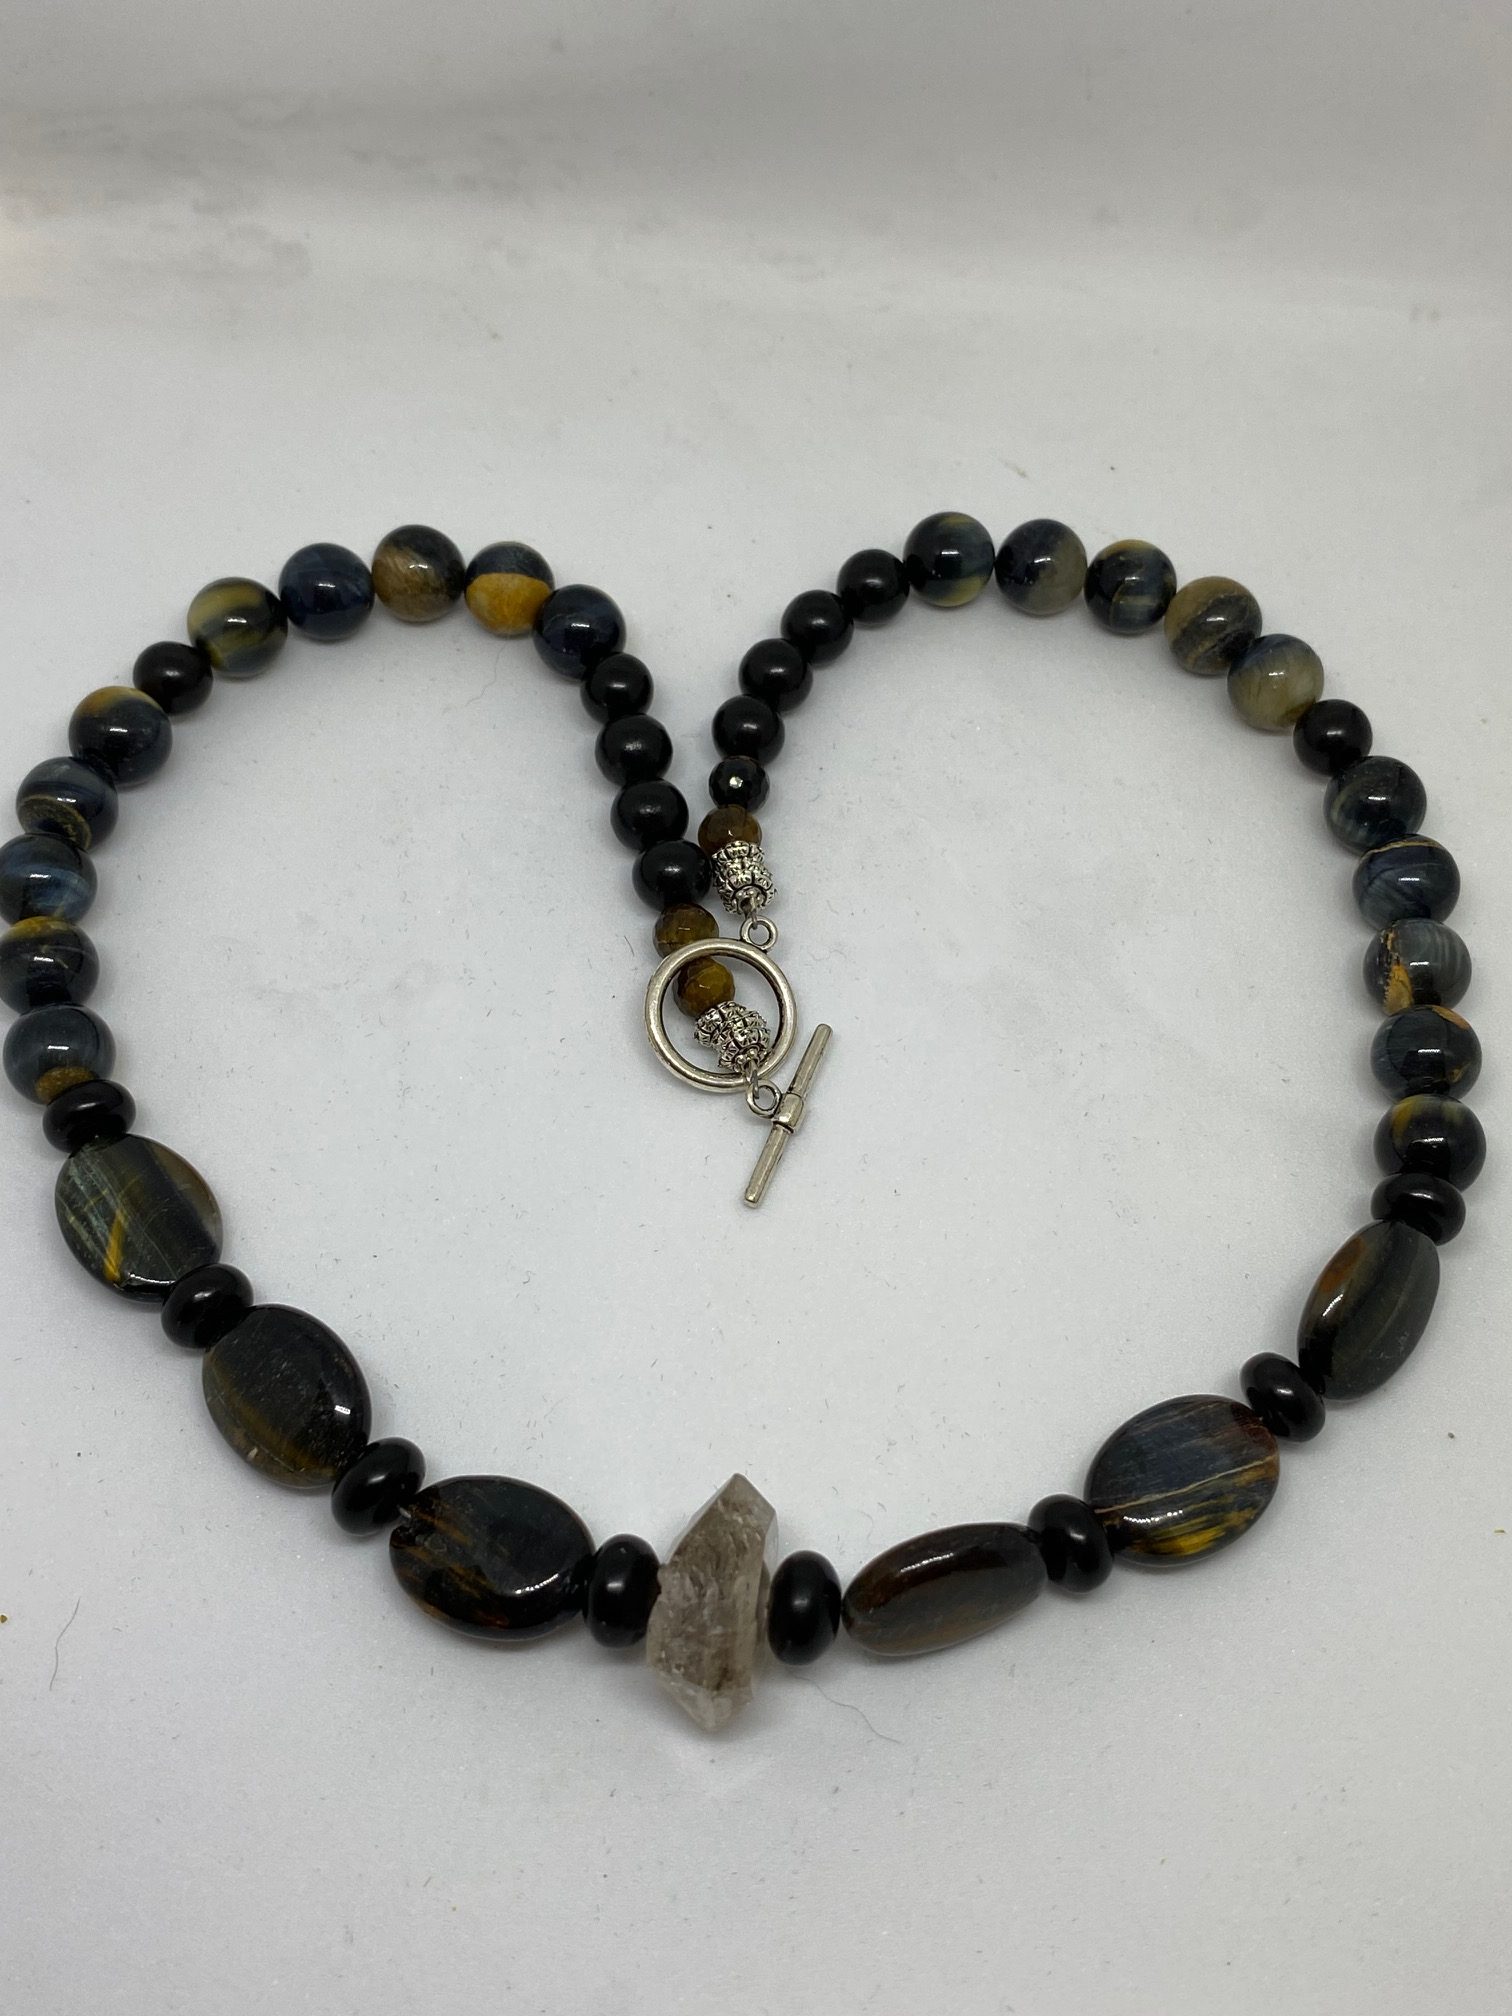 Blue Tiger Eye, Herkimer Diamond, and Jet Necklace. This necklace promotes Clear Communication, Psychic Development, and Protection. 